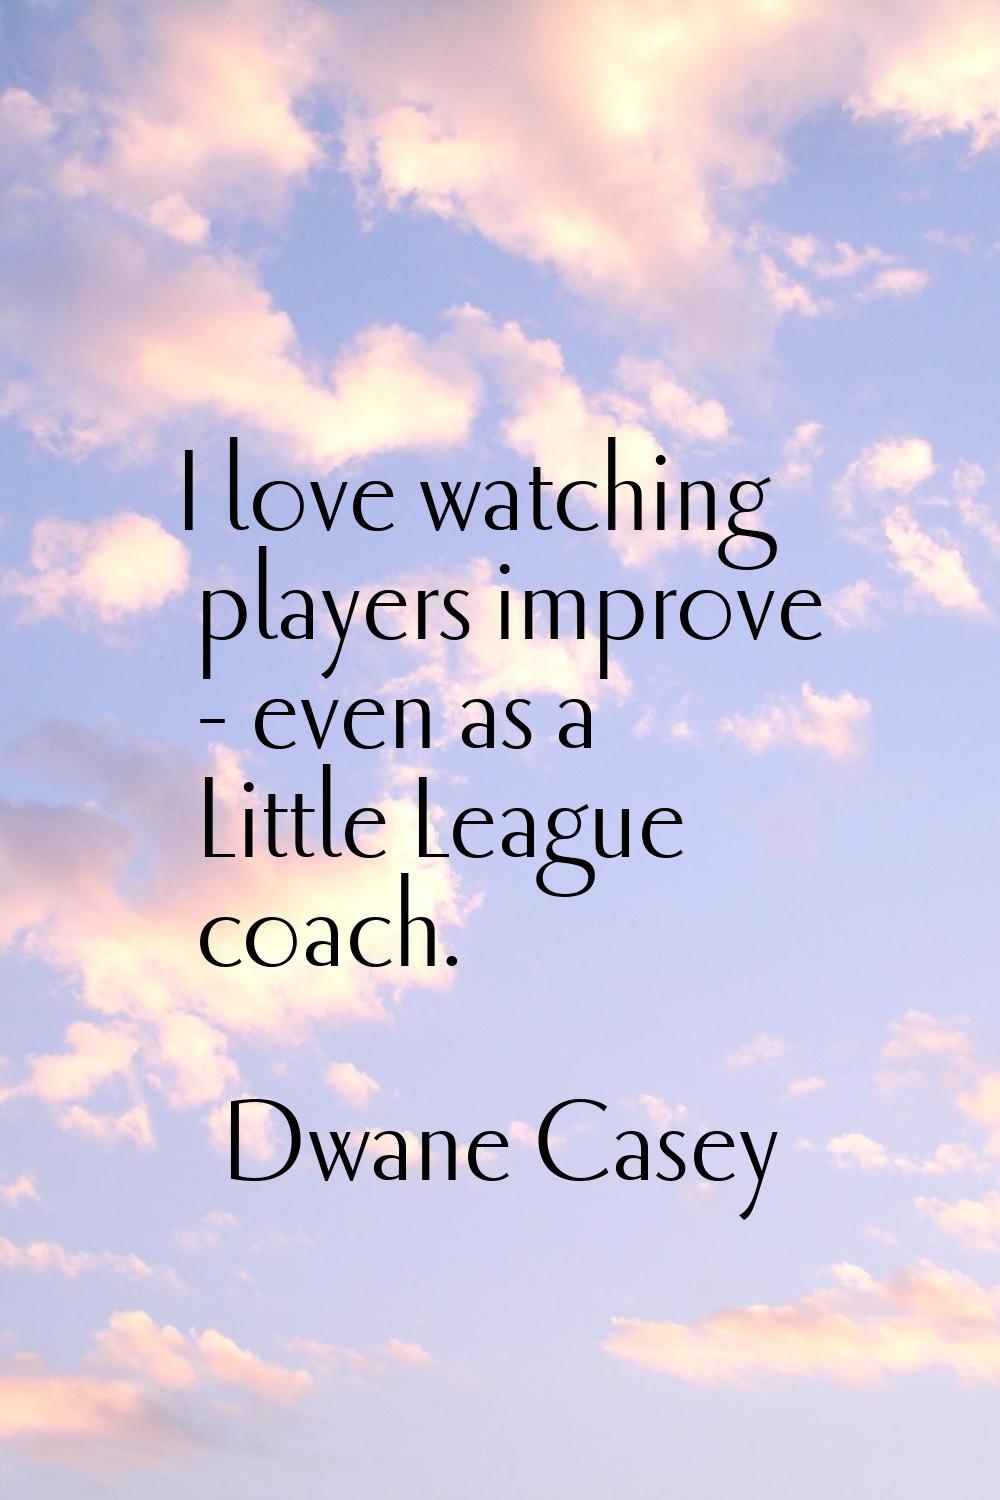 I love watching players improve - even as a Little League coach.